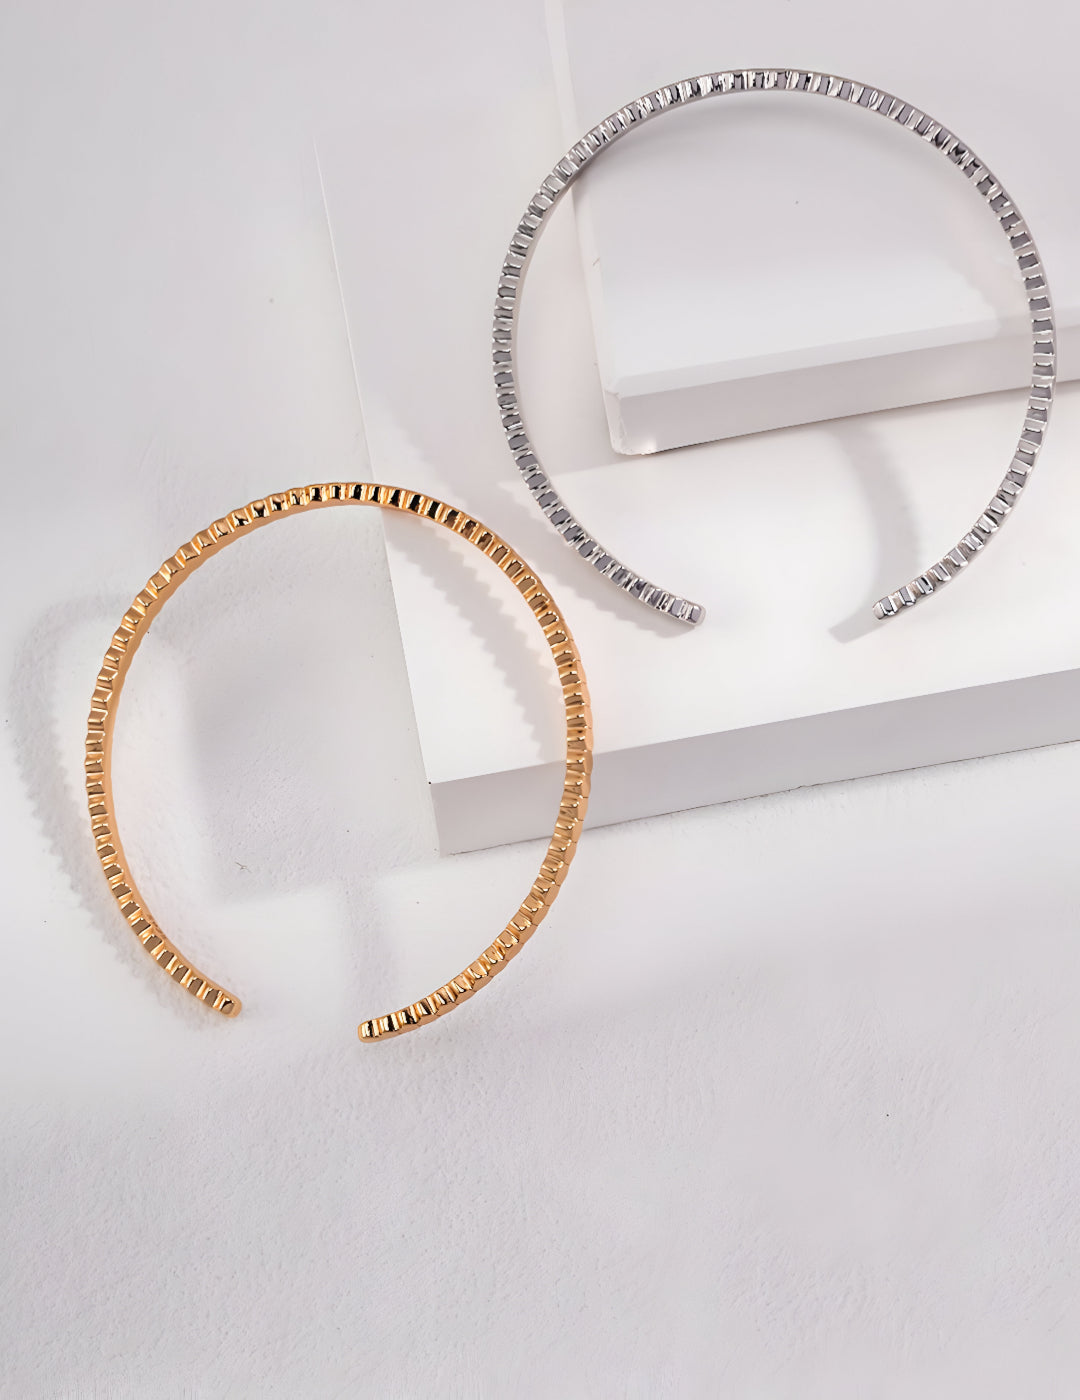 Embrace Contemporary Elegance - Cuff Bracelet - S925 Sterling Silver with 18K Gold Vermeil   - Define your contemporary style - Timeless design and radiant charm are perfect for any occasion